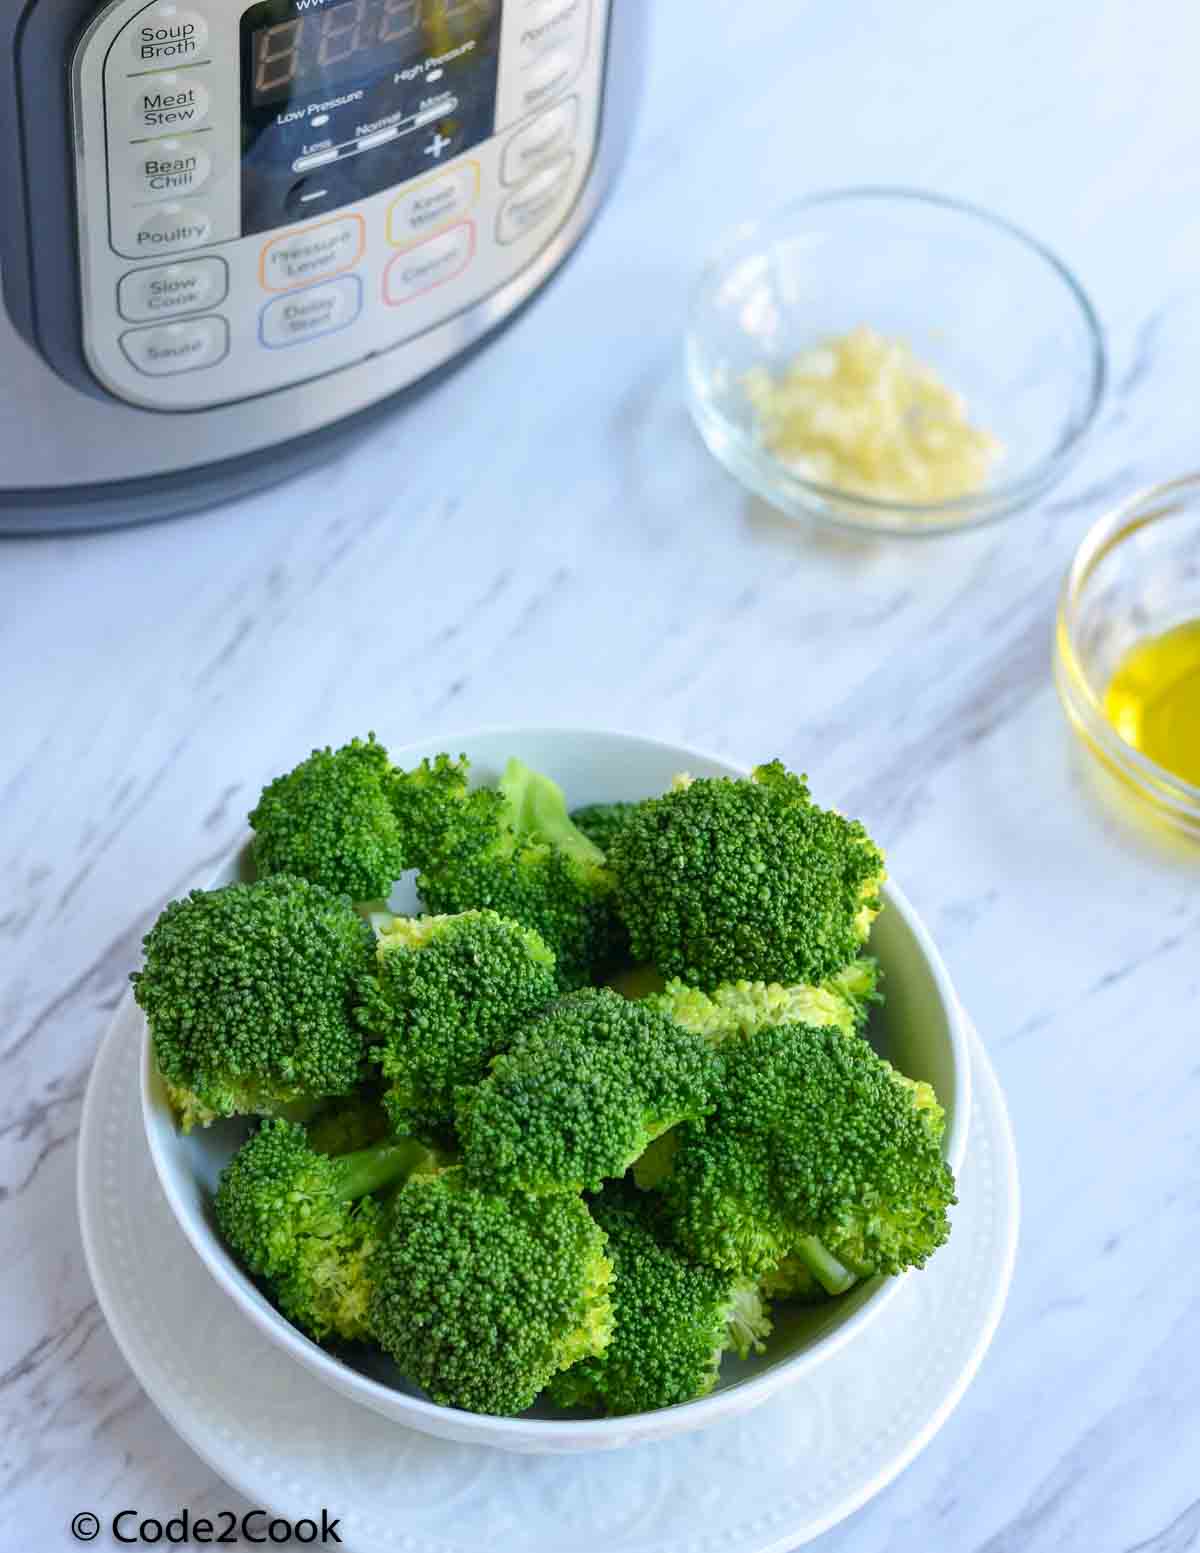 steamed broccoli served in white bowl and placed near instant pot.